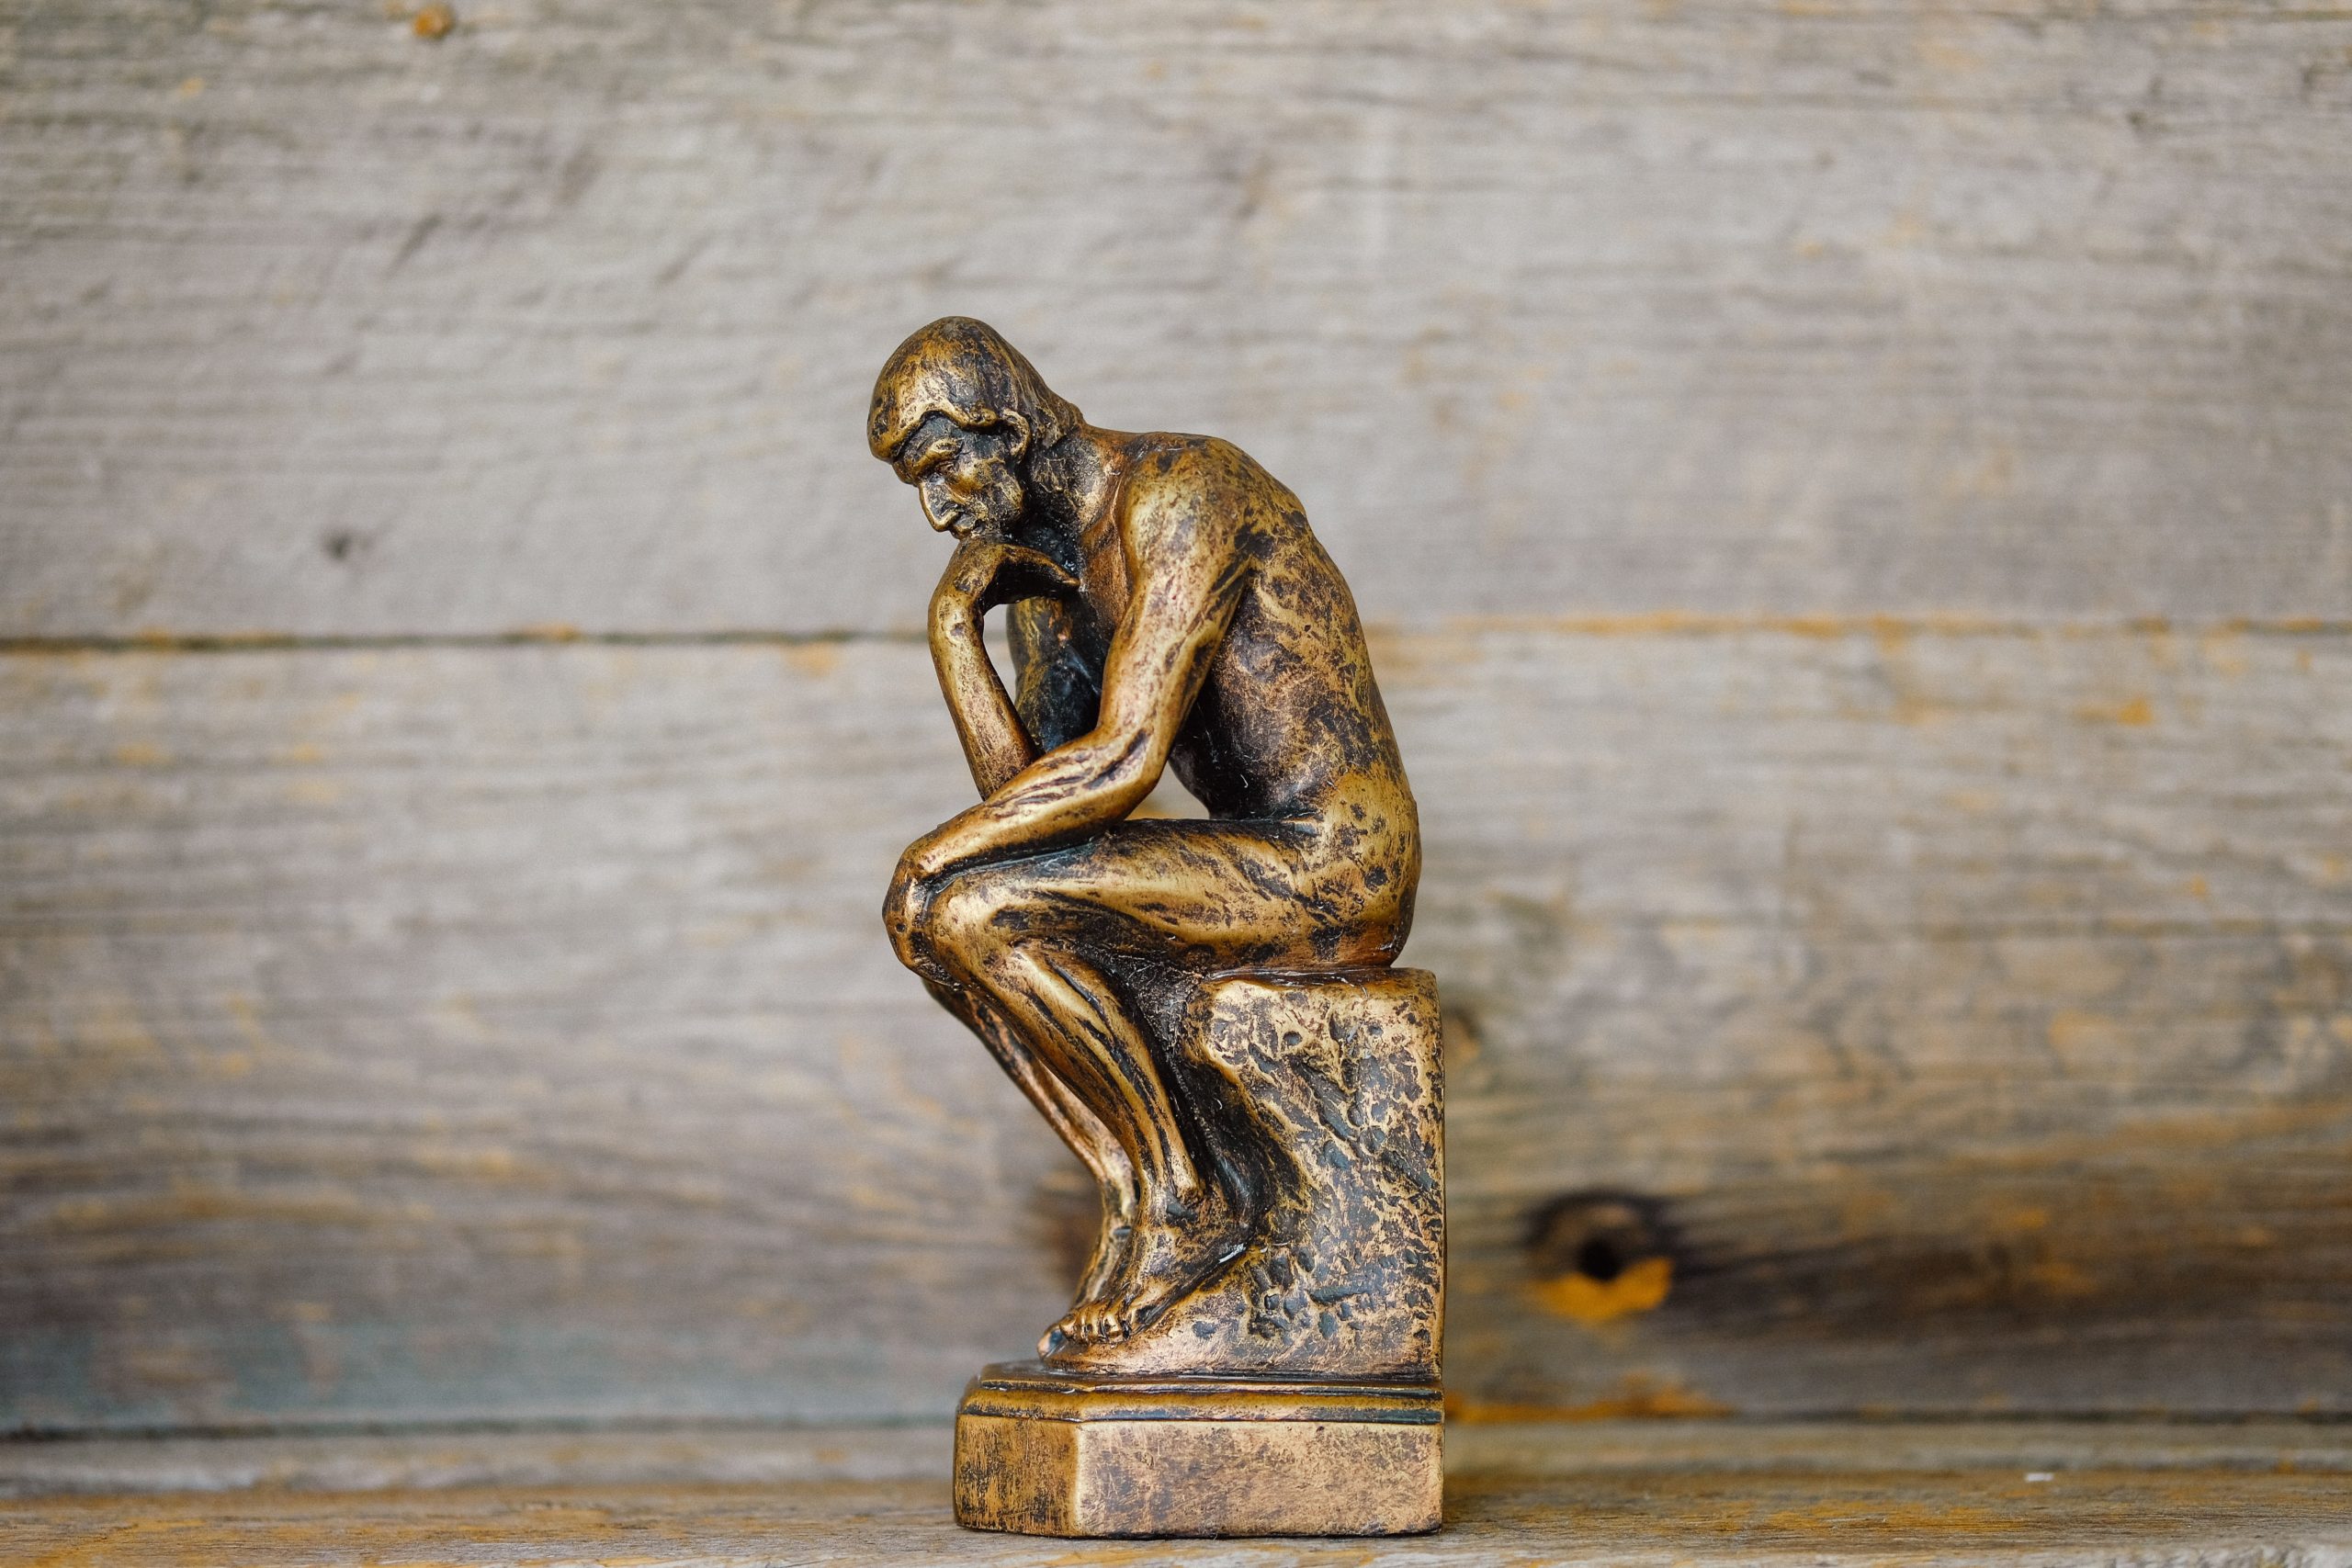 A small statue of 'The Thinker'.